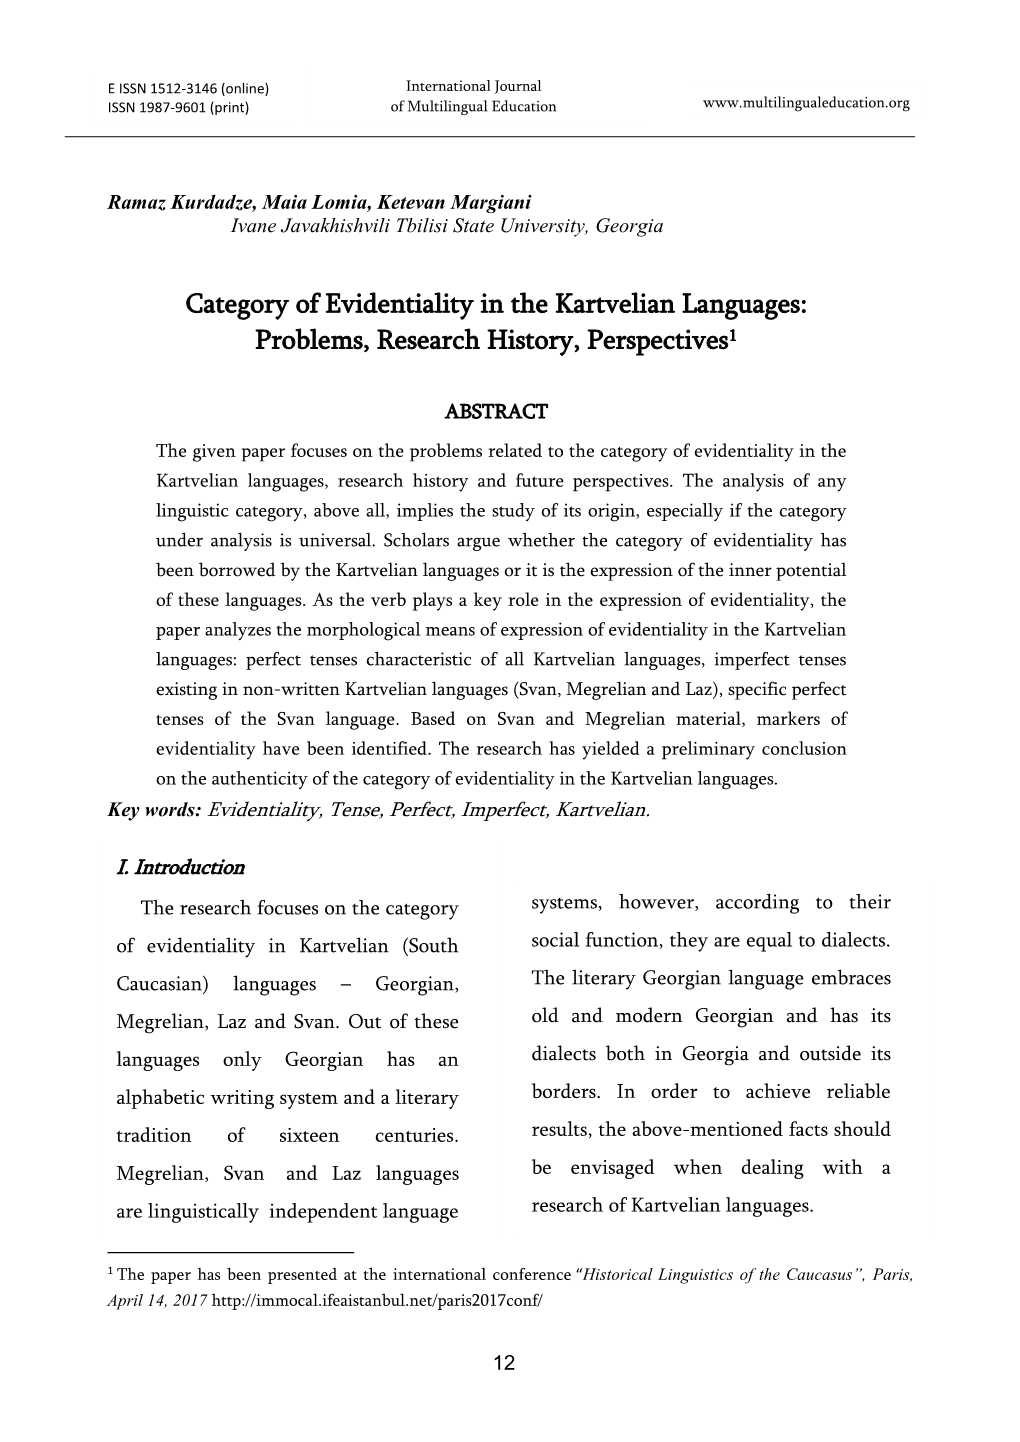 Category of Evidentiality in the Kartvelian Languages: Problems, Research History, Perspectives1